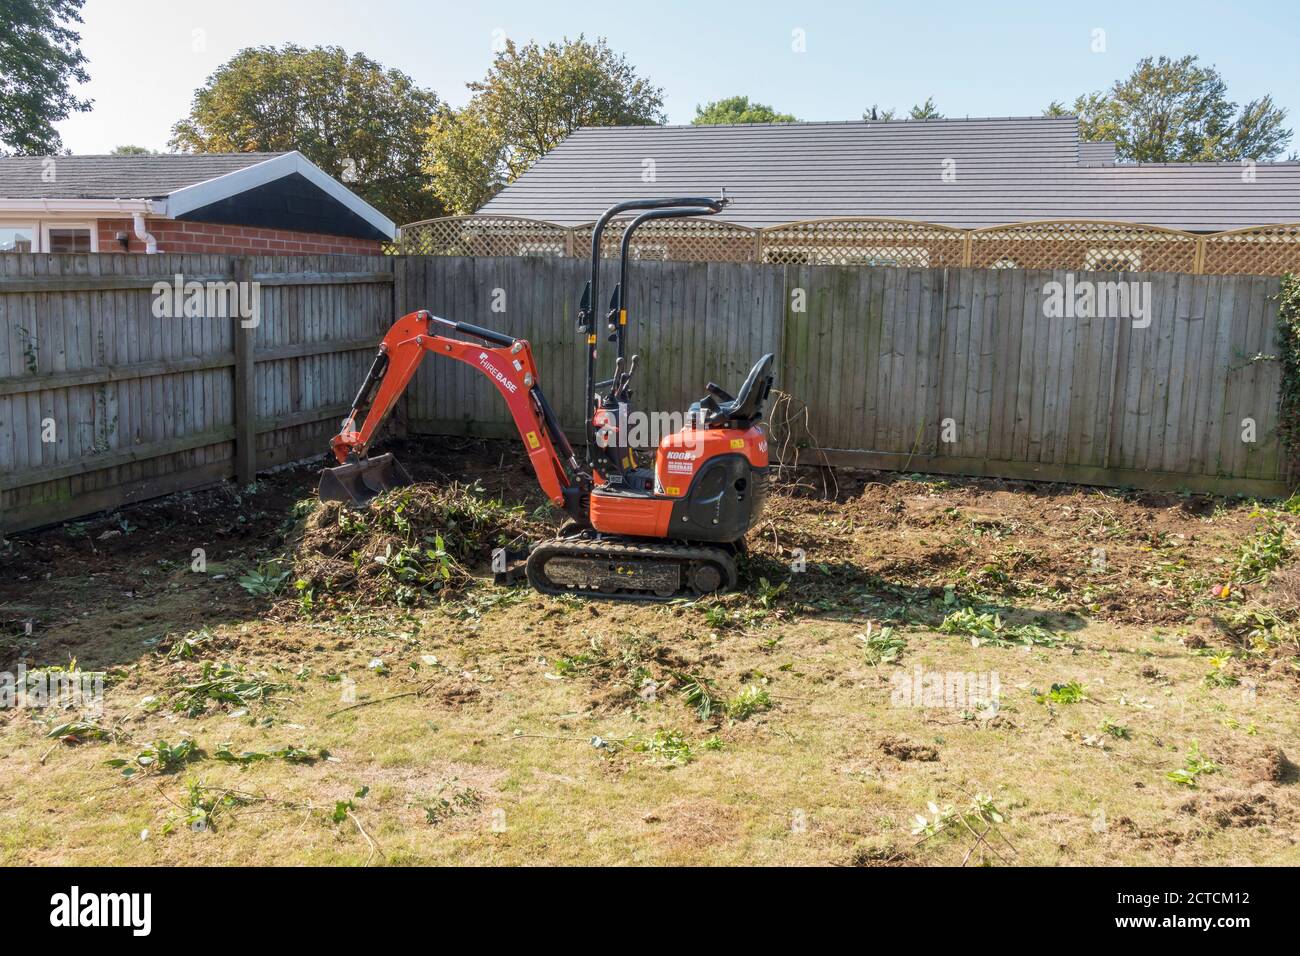 Mini digger clearing garden for remaking Stock Photo